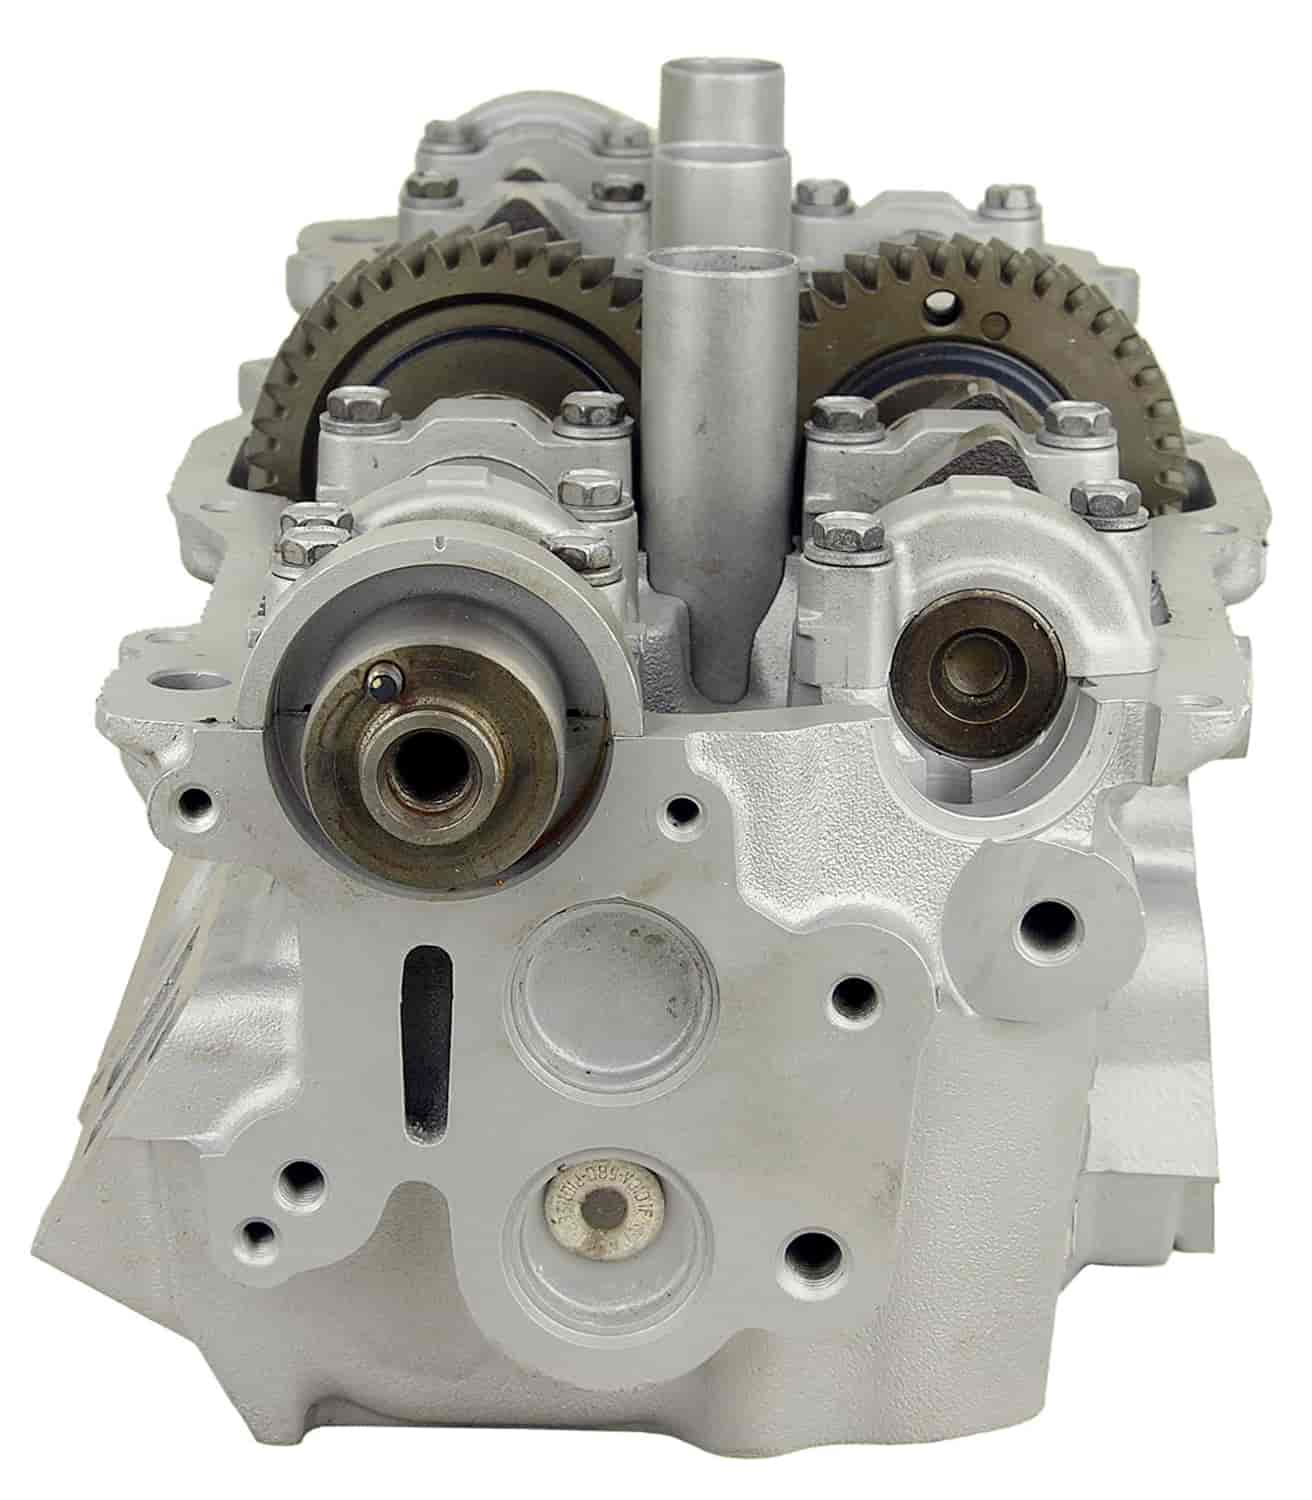 Remanufactured Cylinder Head for 1992-1993 Toyota/Lexus with 3.0L V6 3VZFE